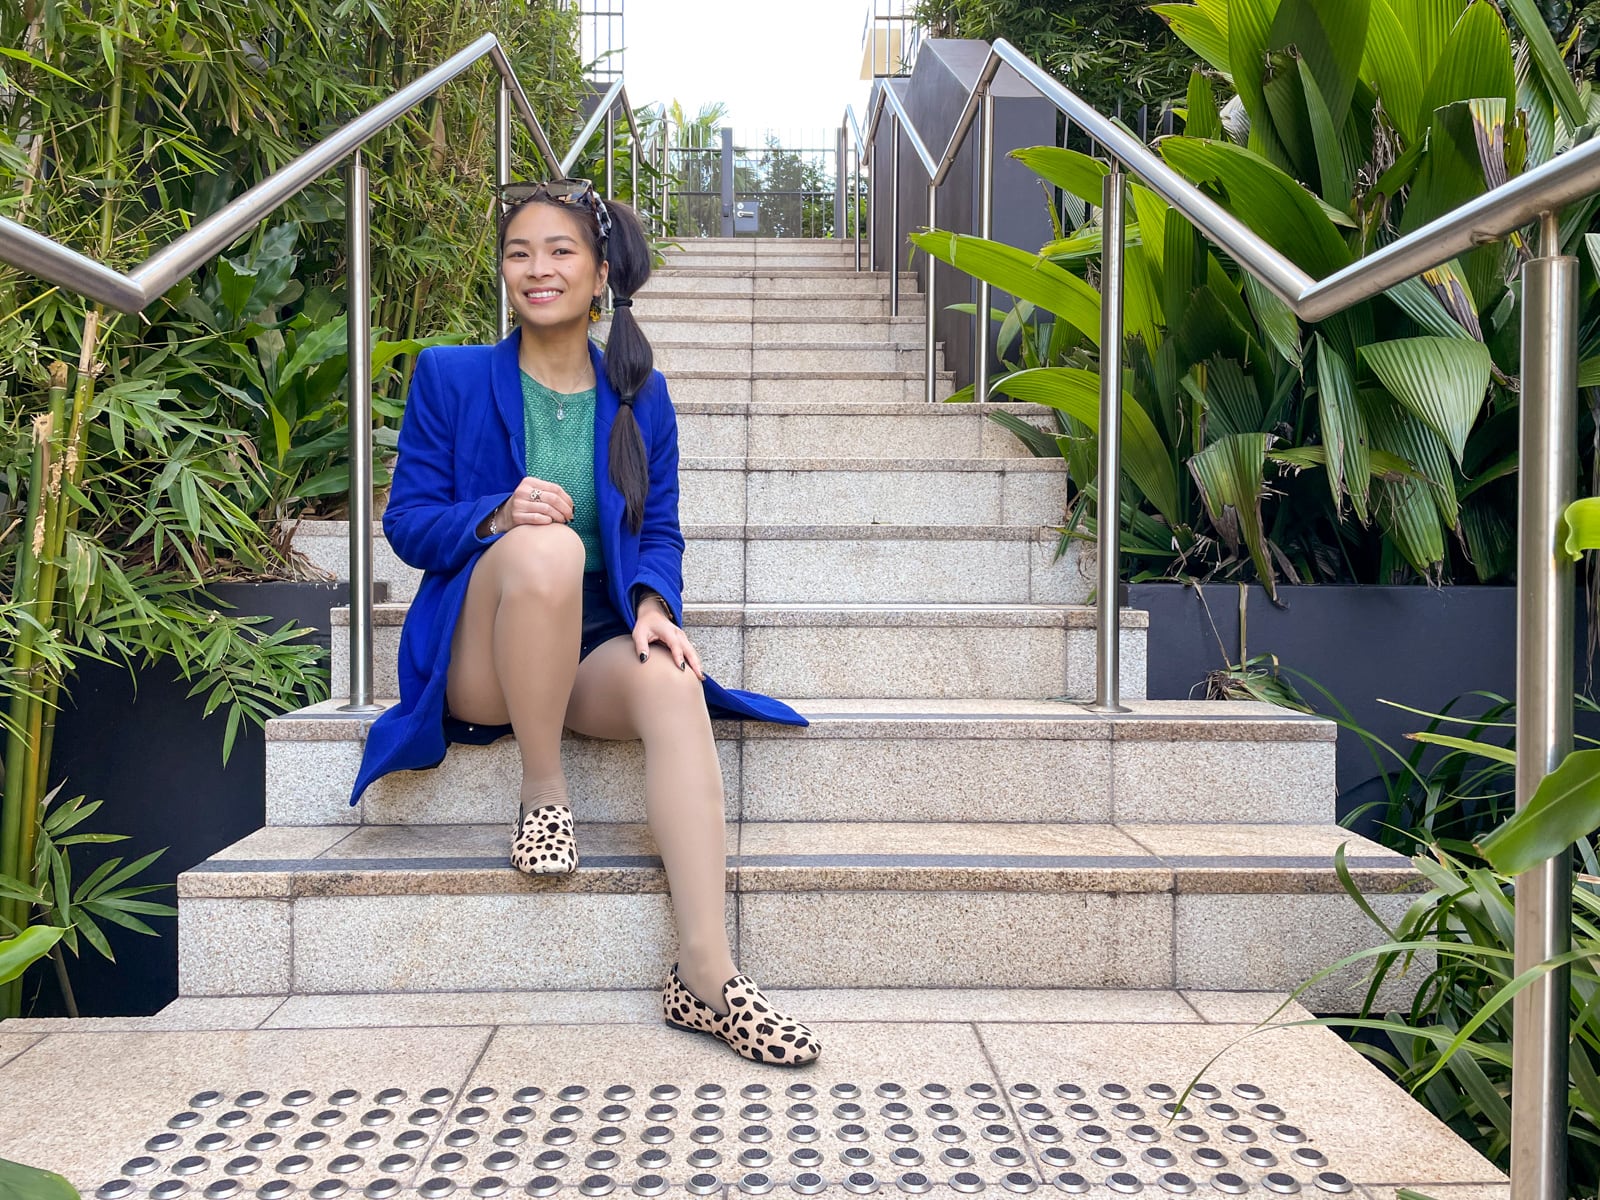 An Asian woman with dark hair tied in a ponytail with tied sections, sitting on a set of concrete stairs. Both her knees are bent with her hands relaxing on her knees. She is facing slightly towards the camera. She is wearing a bright blue coat, a green top and black shorts, and giraffe print loafers. She has sunglasses on top of her head.